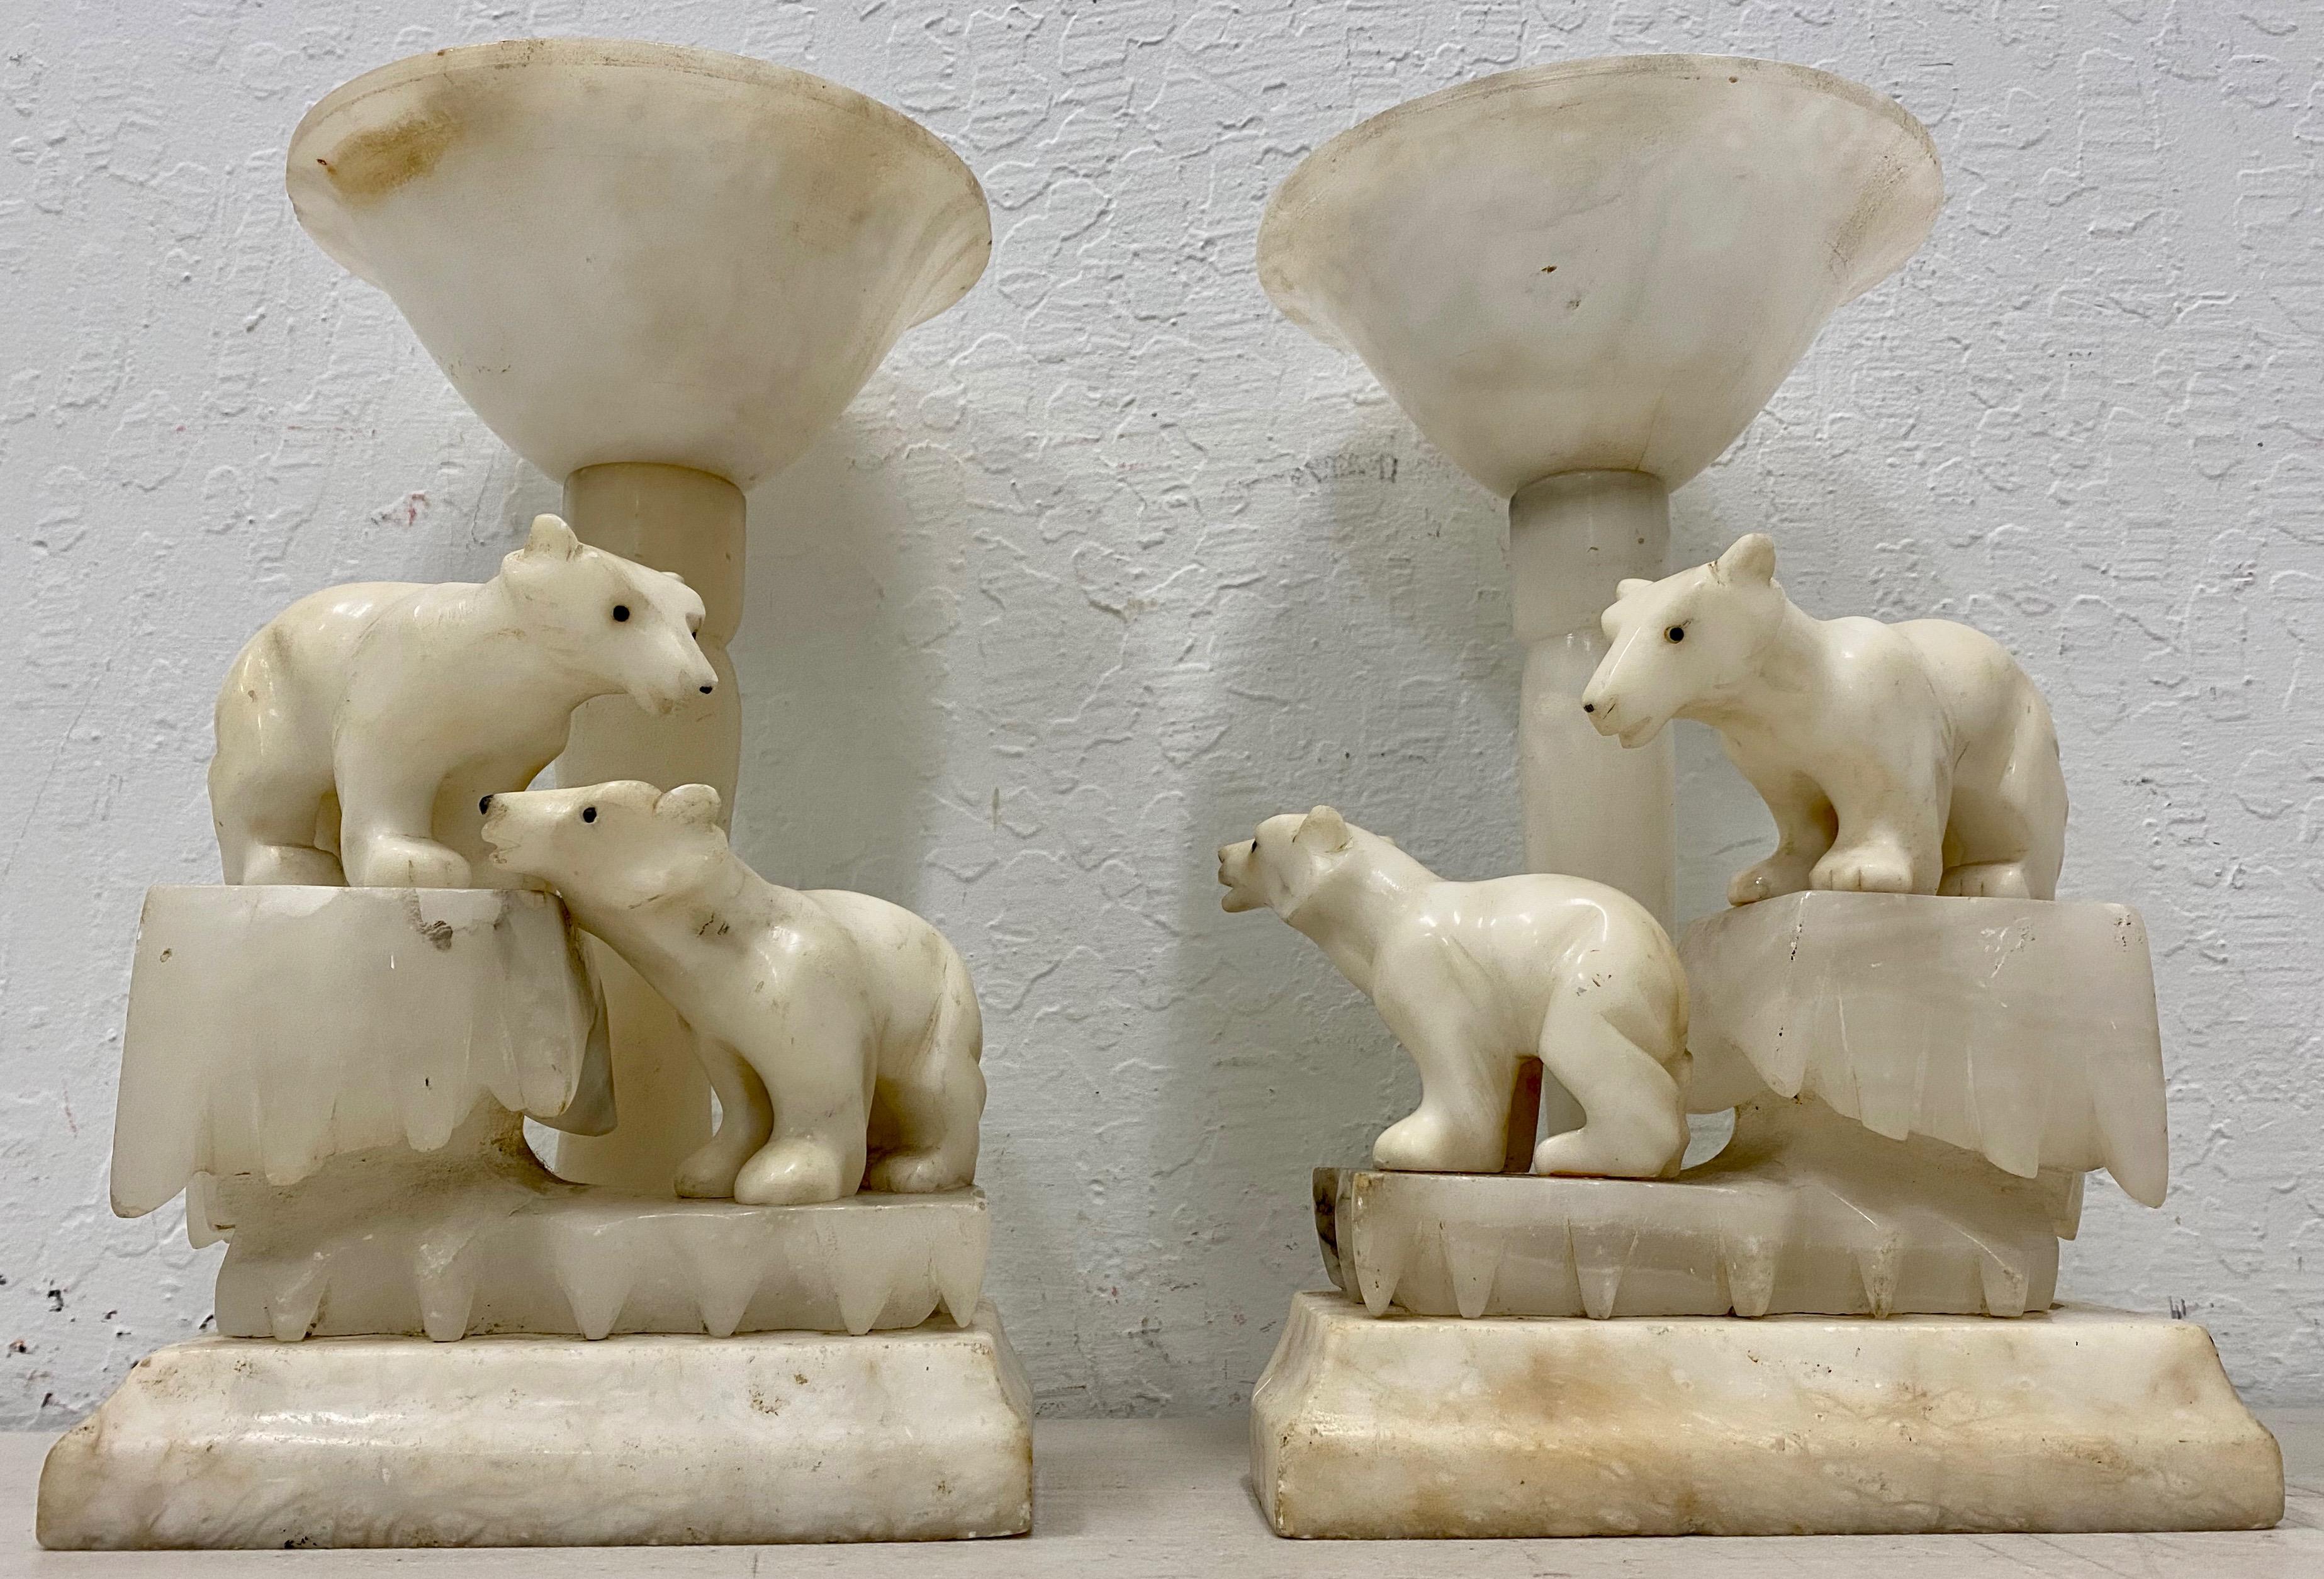 Pair of Art Deco alabaster polar bear table lamps, circa 1920s

Brilliant pair of hand carved alabaster Art Deco polar bear table lamps.

Each lamp has a unique pair of Polar Bears walking around on icebergs.

The lamps are wired and ready to